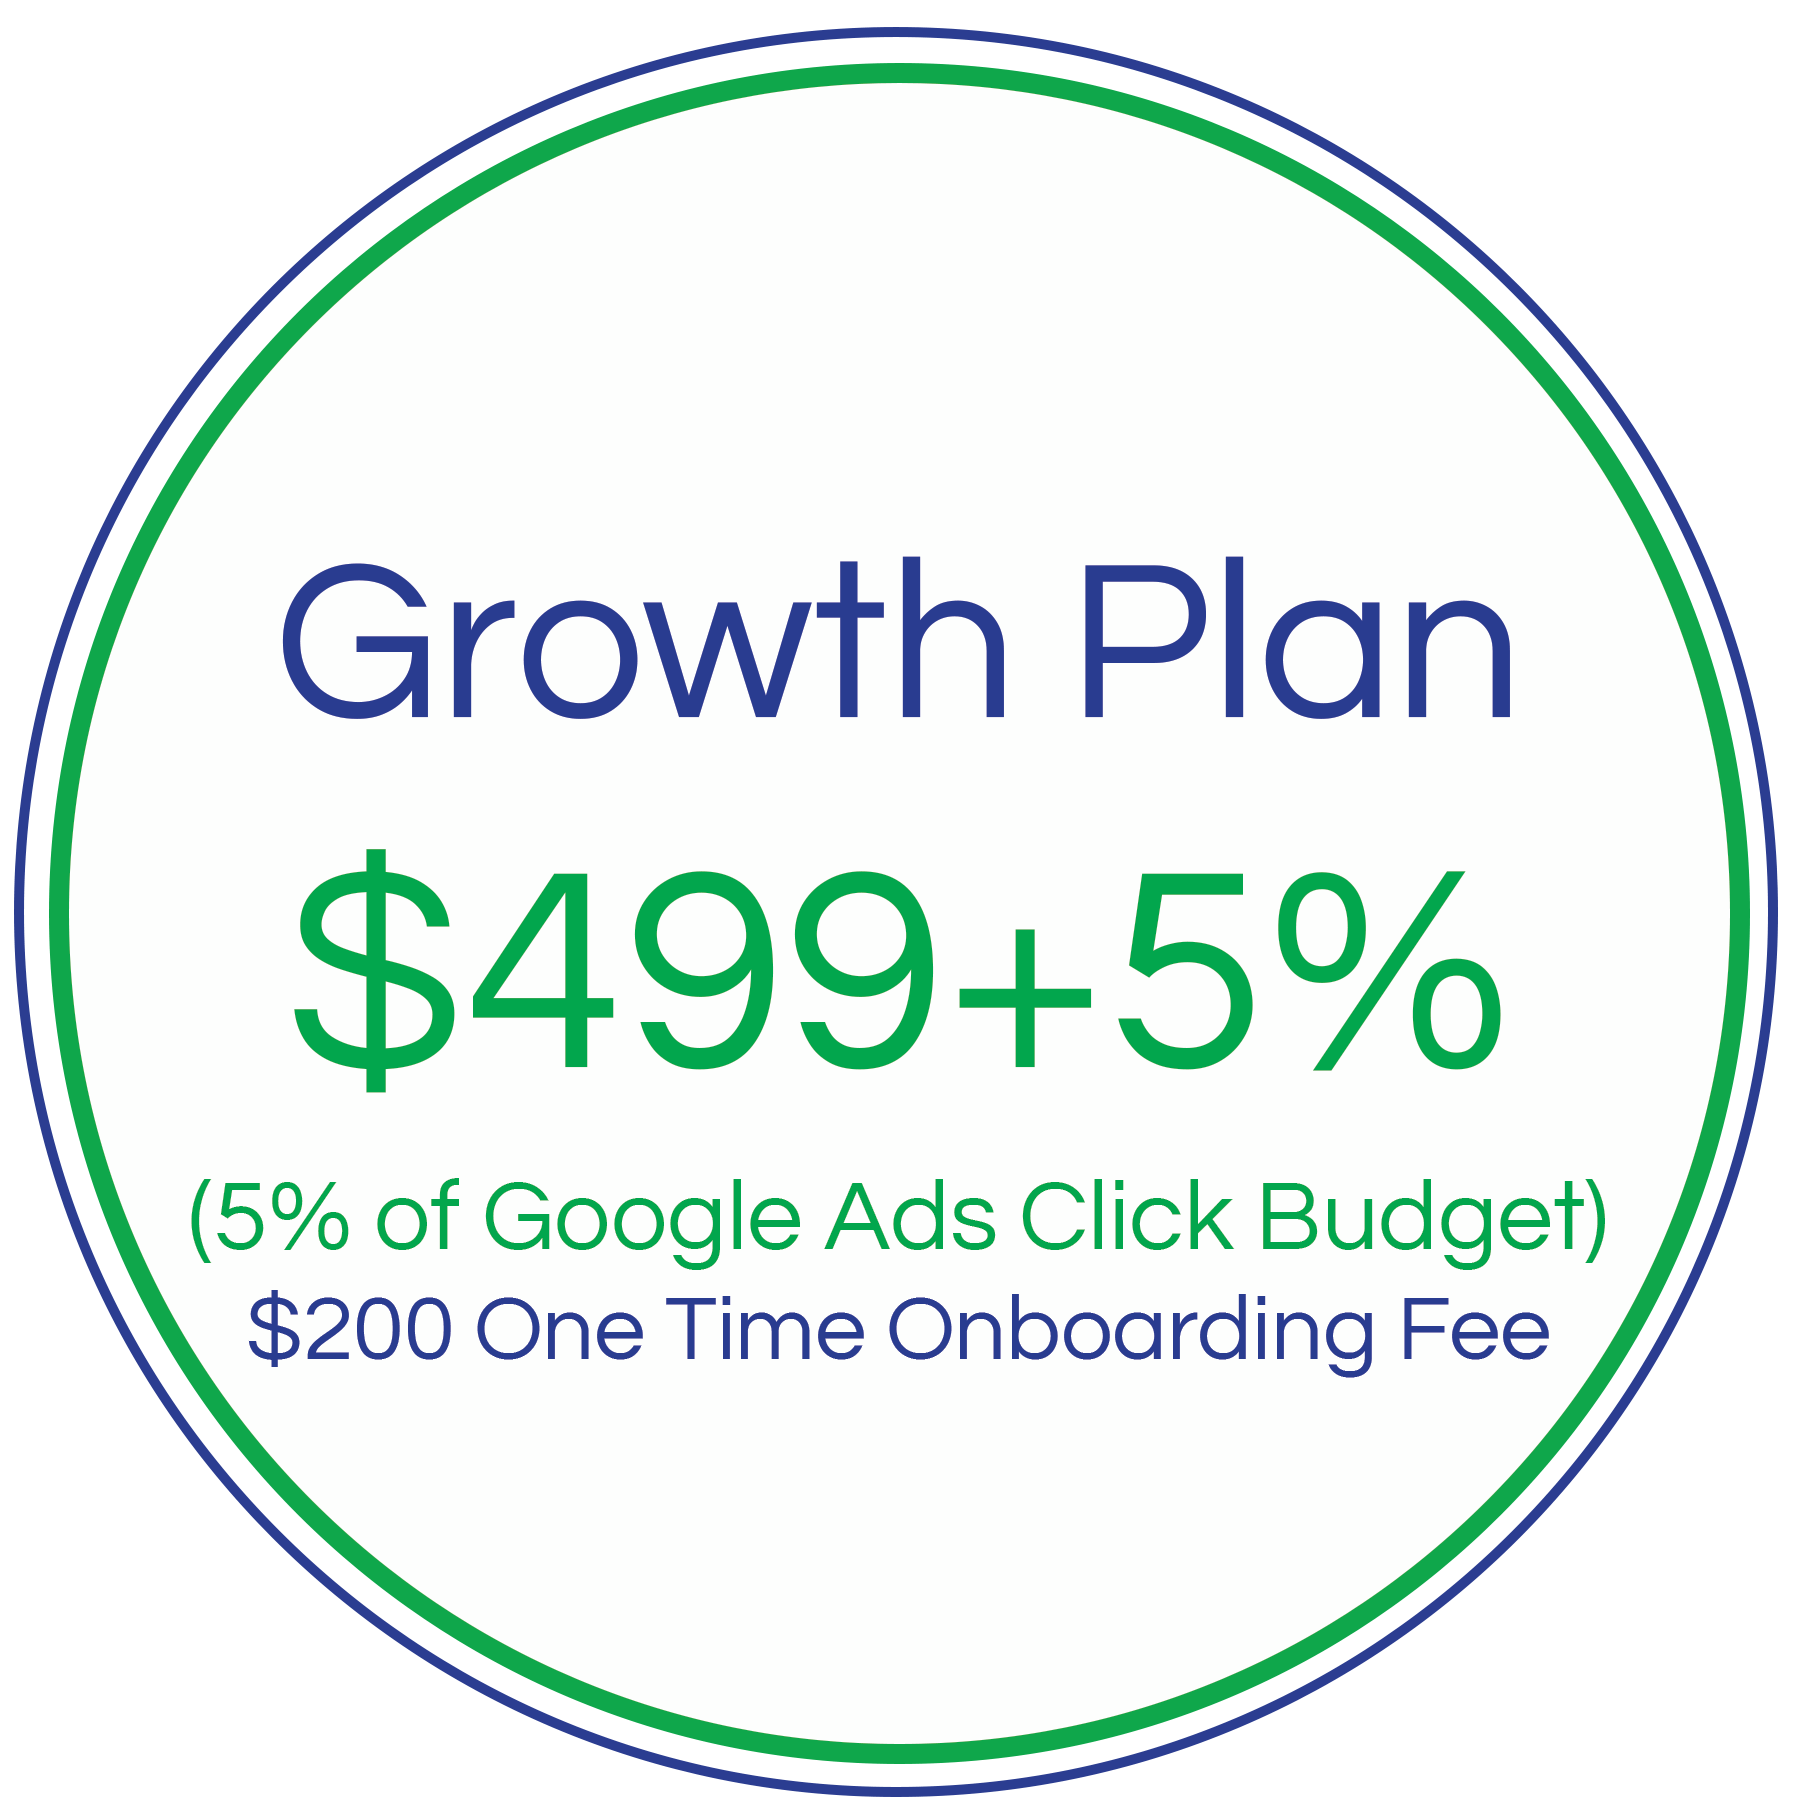 Google Ads management prices for Growth Plan with additional customer service starting at $499 per month.